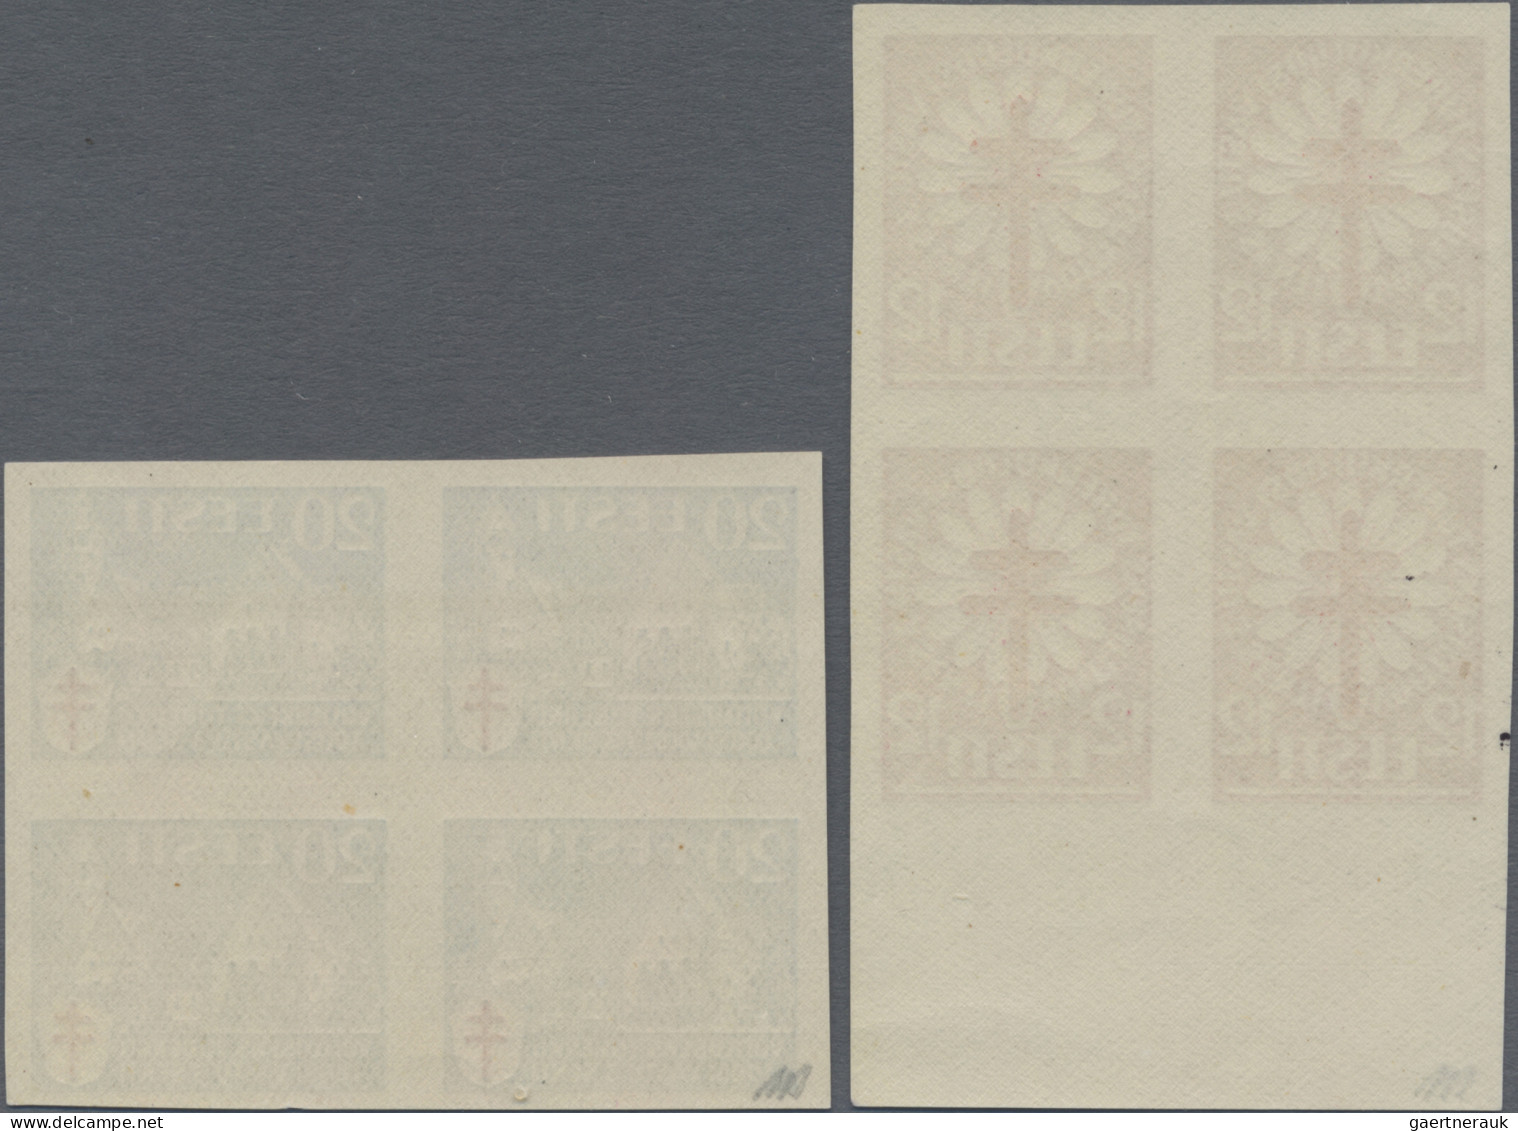 Estonia: 1933, Tuberculosis Fighting, 12s.+3s. And 20s.+3s., Two Imperforate Pro - Estland